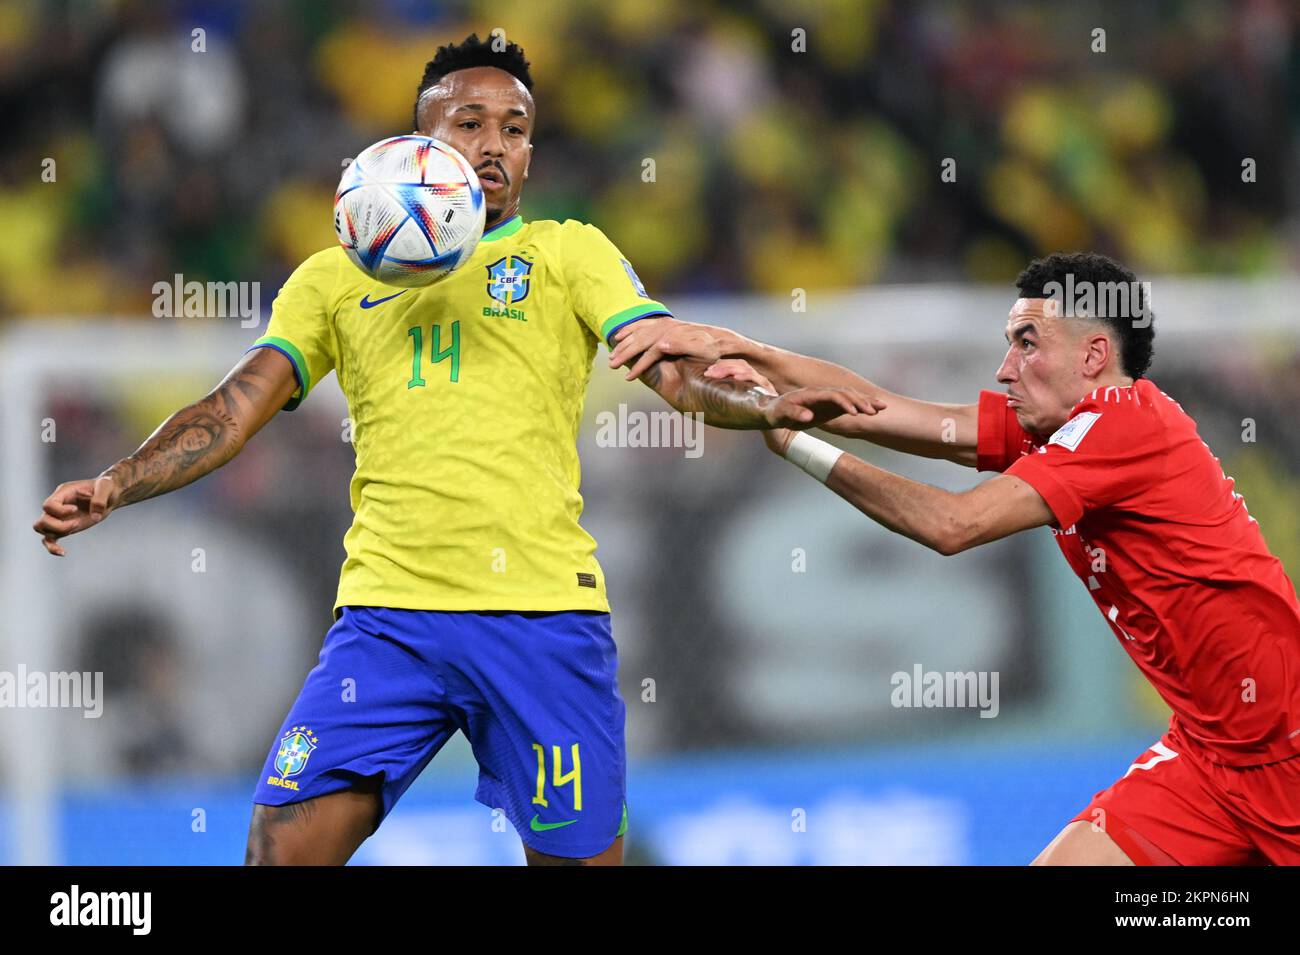 Doha, Qatar. 28th Nov, 2022. Soccer, World Cup 2022 in Qatar, Brazil - Switzerland, preliminary round, Group G, Matchday 2, at Stadium 974, Brazil's Éder Militao (l) is tackled by Switzerland's Ruben Vargas. Credit: Federico Gambarini/dpa/Alamy Live News Credit: dpa picture alliance/Alamy Live News Stock Photo